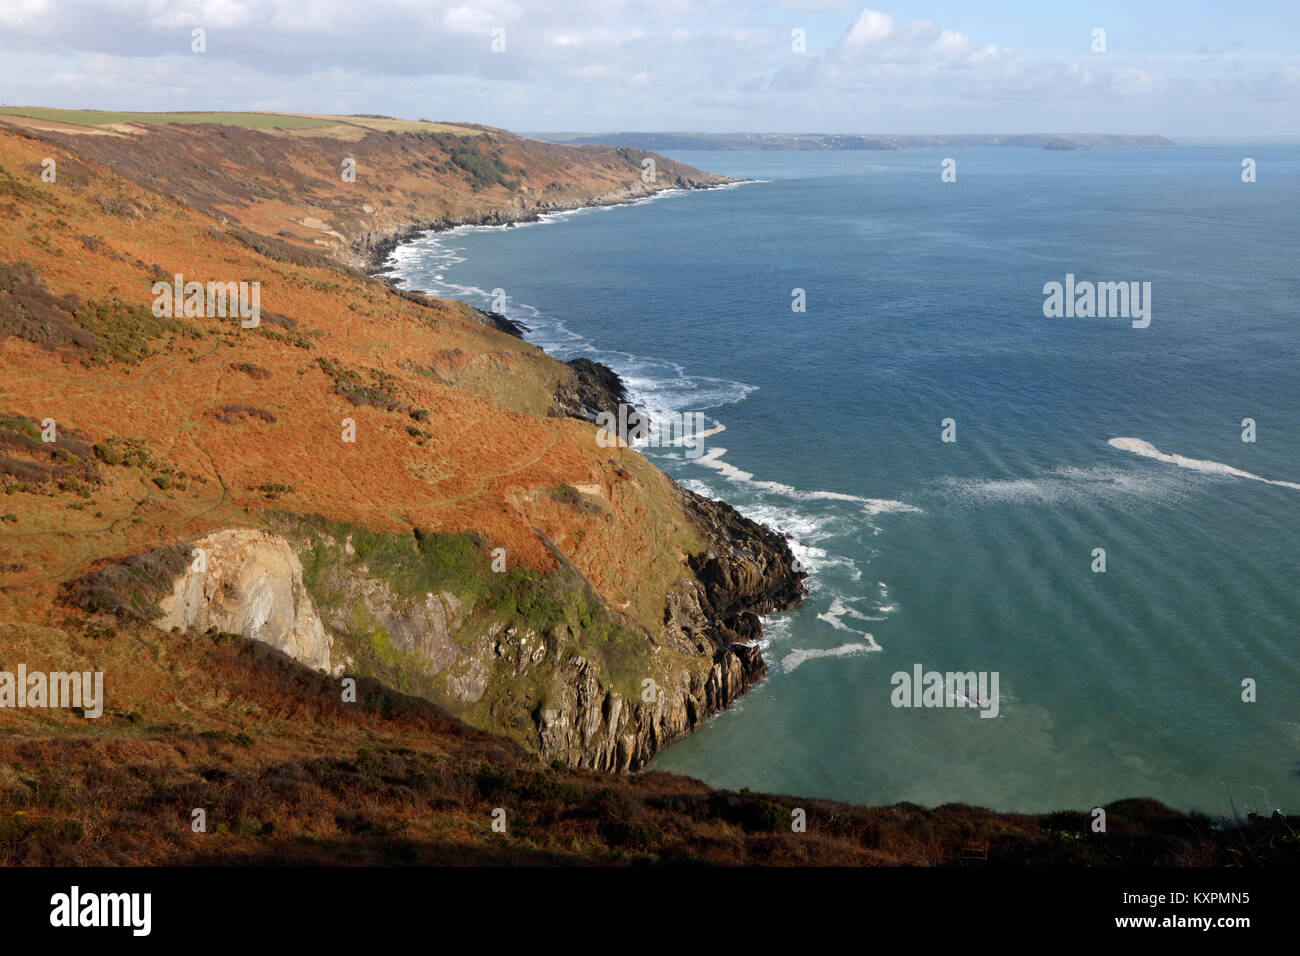 Lillery's Cove and Penlee Point from Rame Head, Cornwall, England, UK Stock Photo